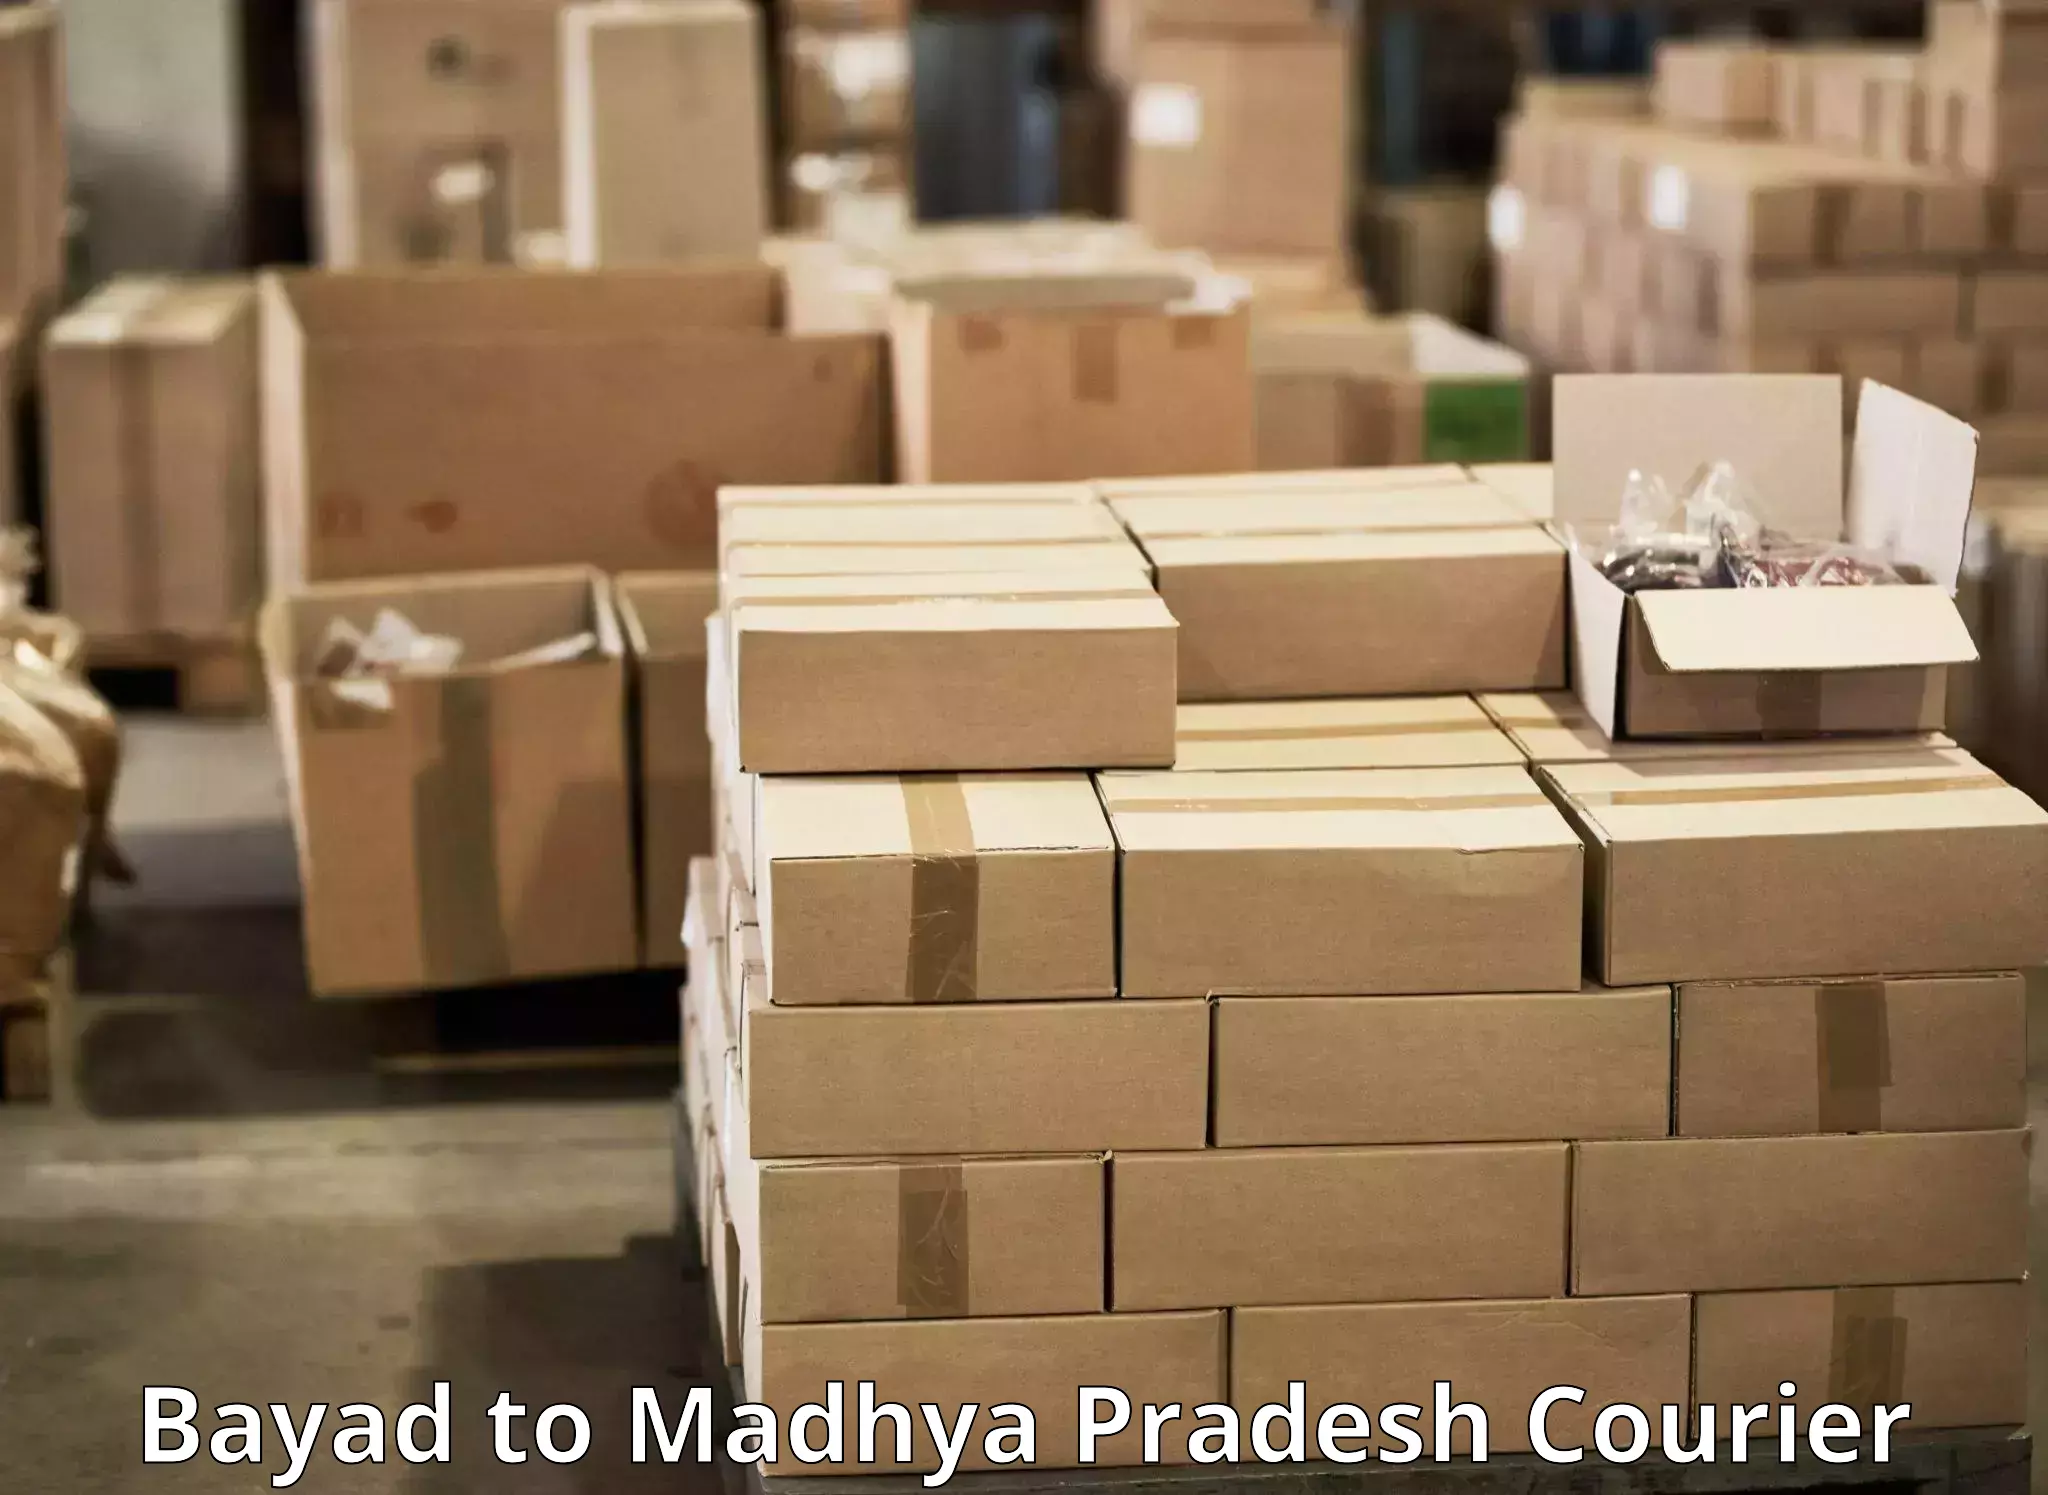 Multi-national courier services Bayad to Madhya Pradesh